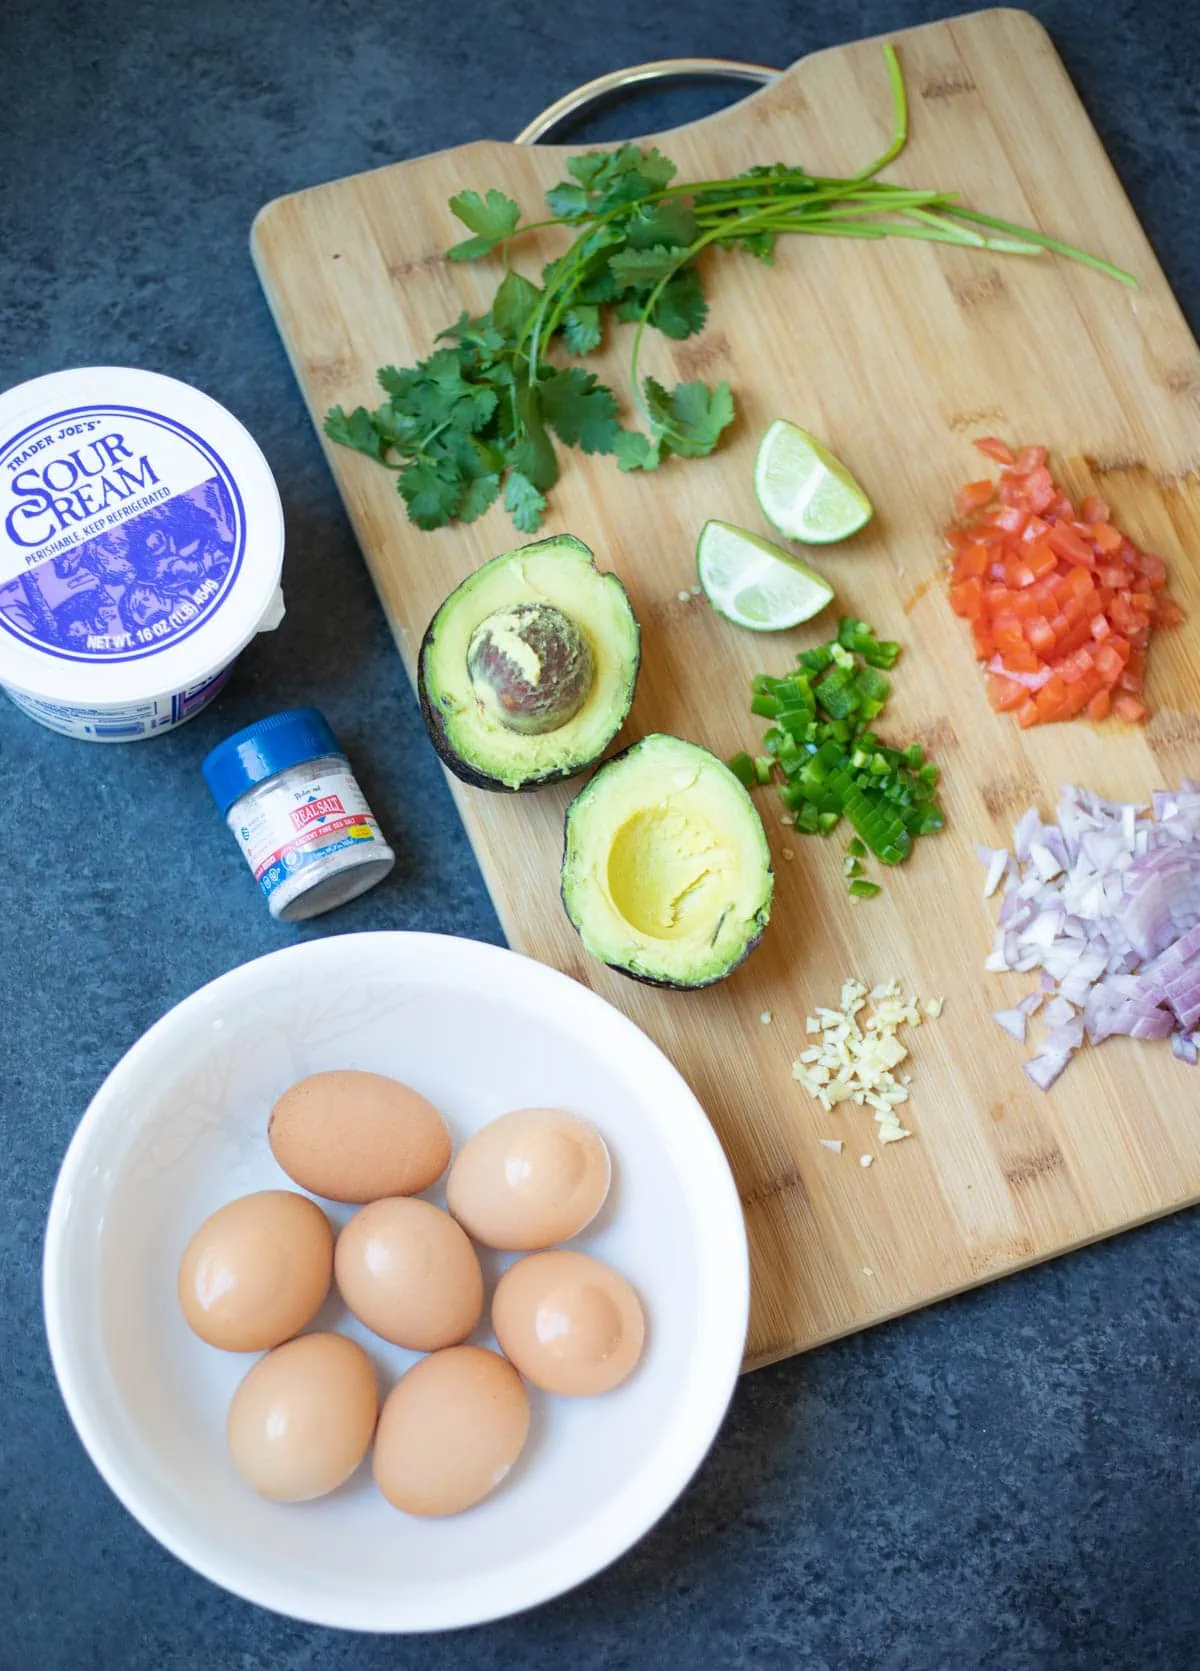 Ingredients to make guacamole deviled eggs